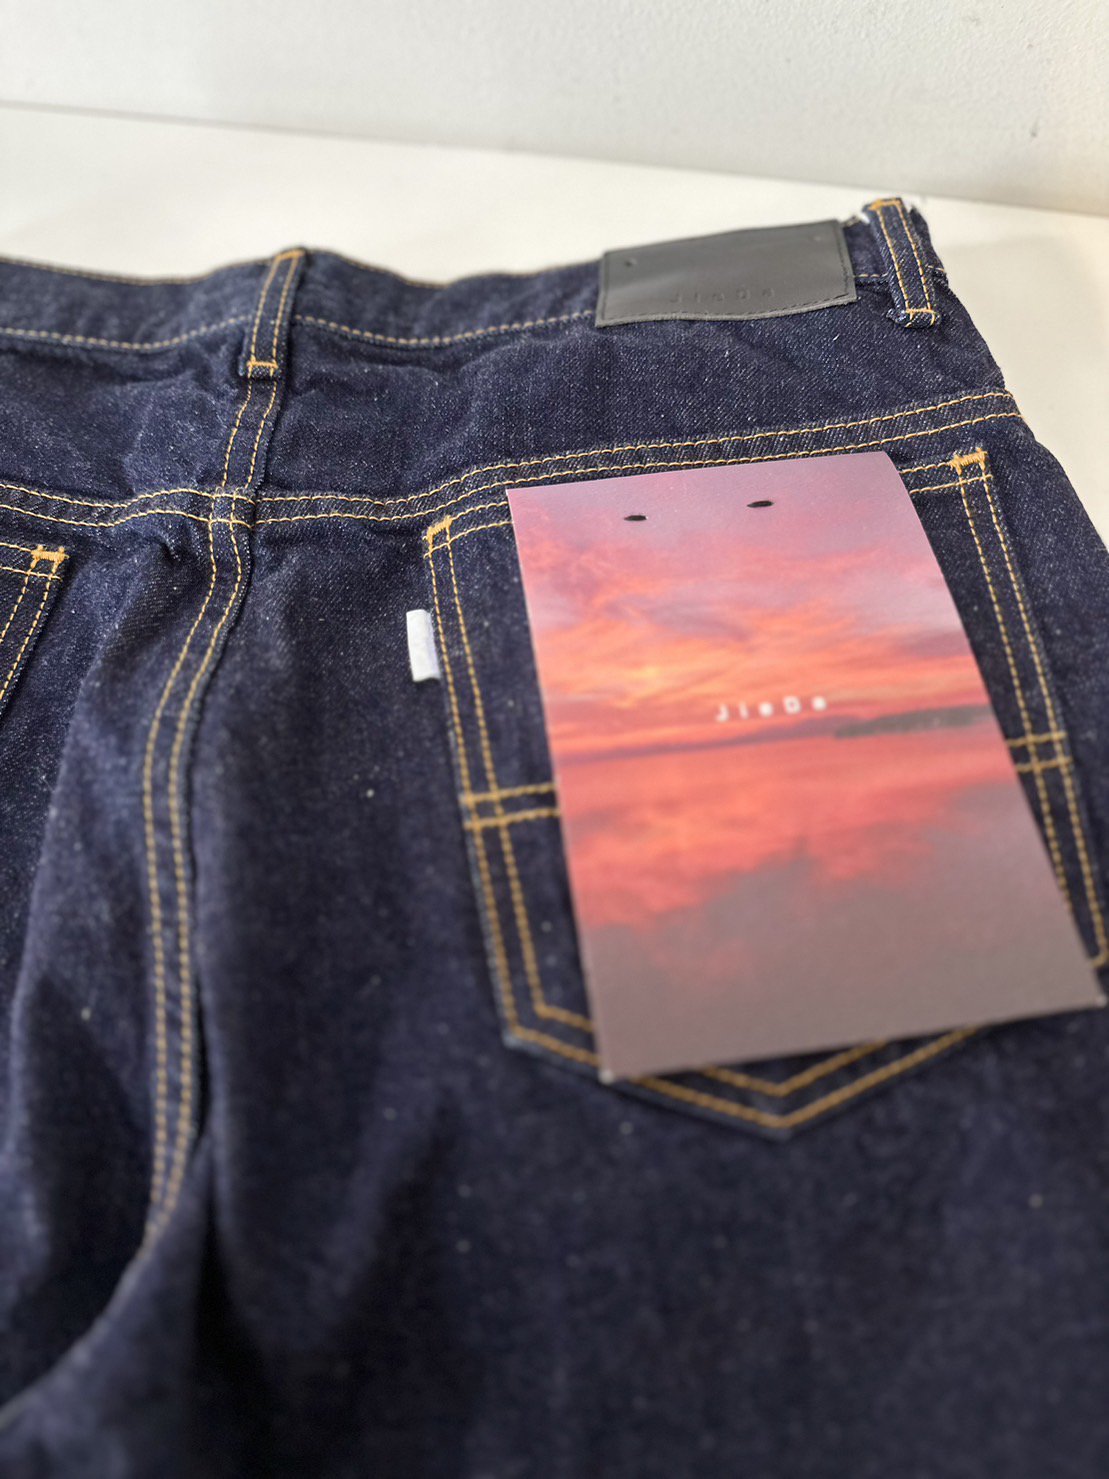 JieDa<br />LOOSE FIT DENIM / INDOGO<img class='new_mark_img2' src='https://img.shop-pro.jp/img/new/icons14.gif' style='border:none;display:inline;margin:0px;padding:0px;width:auto;' />